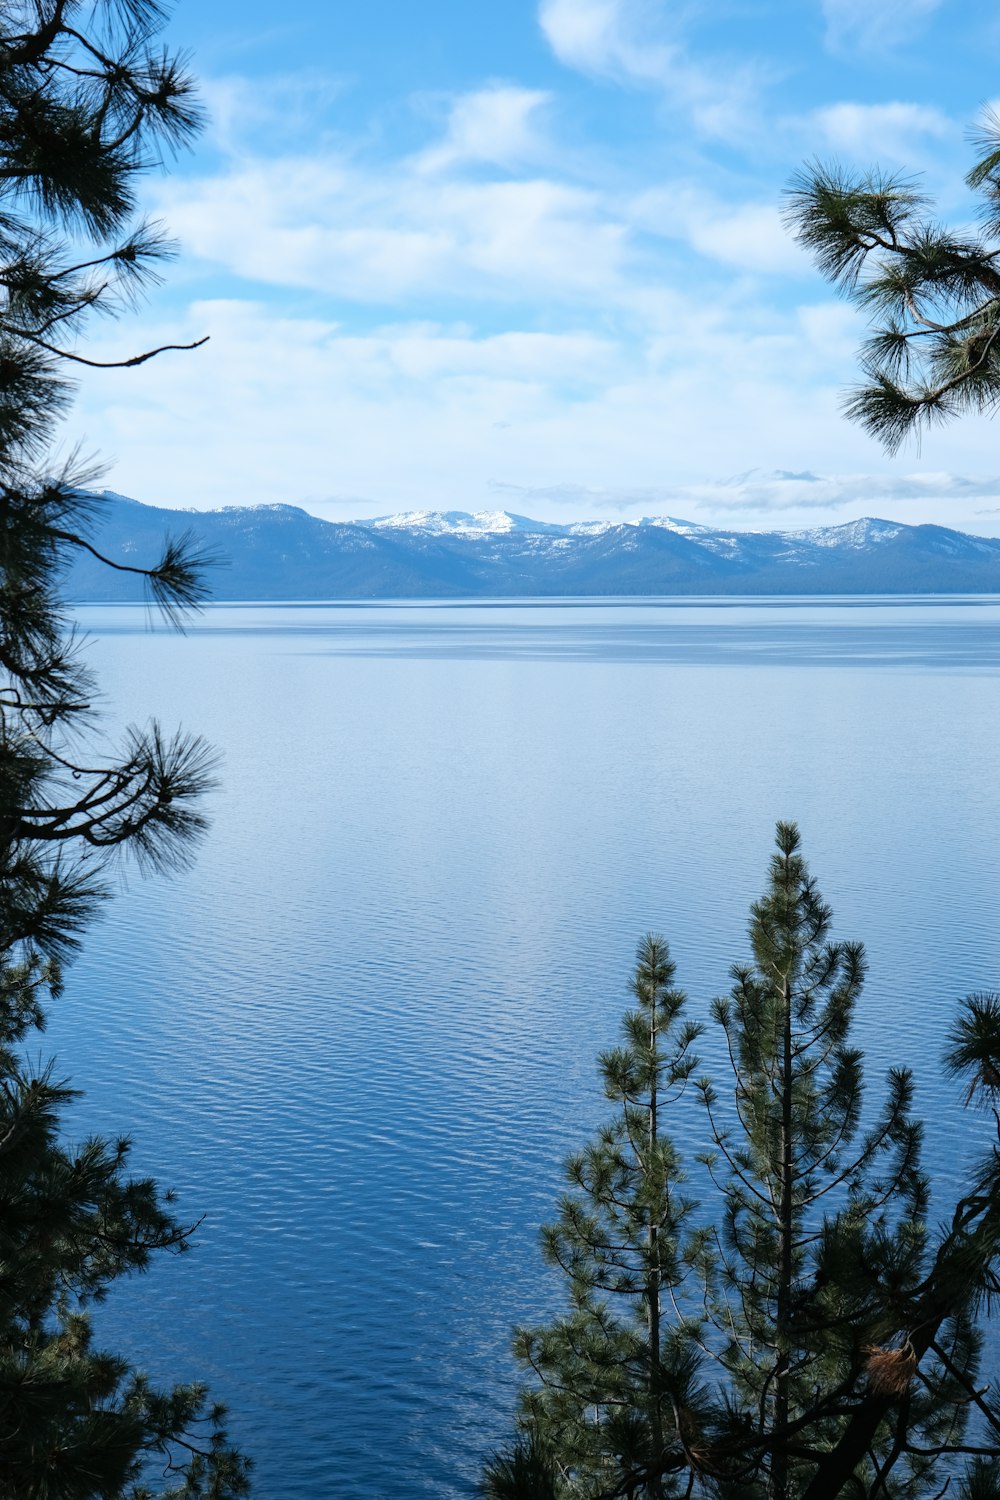 a view of a body of water with mountains in the background